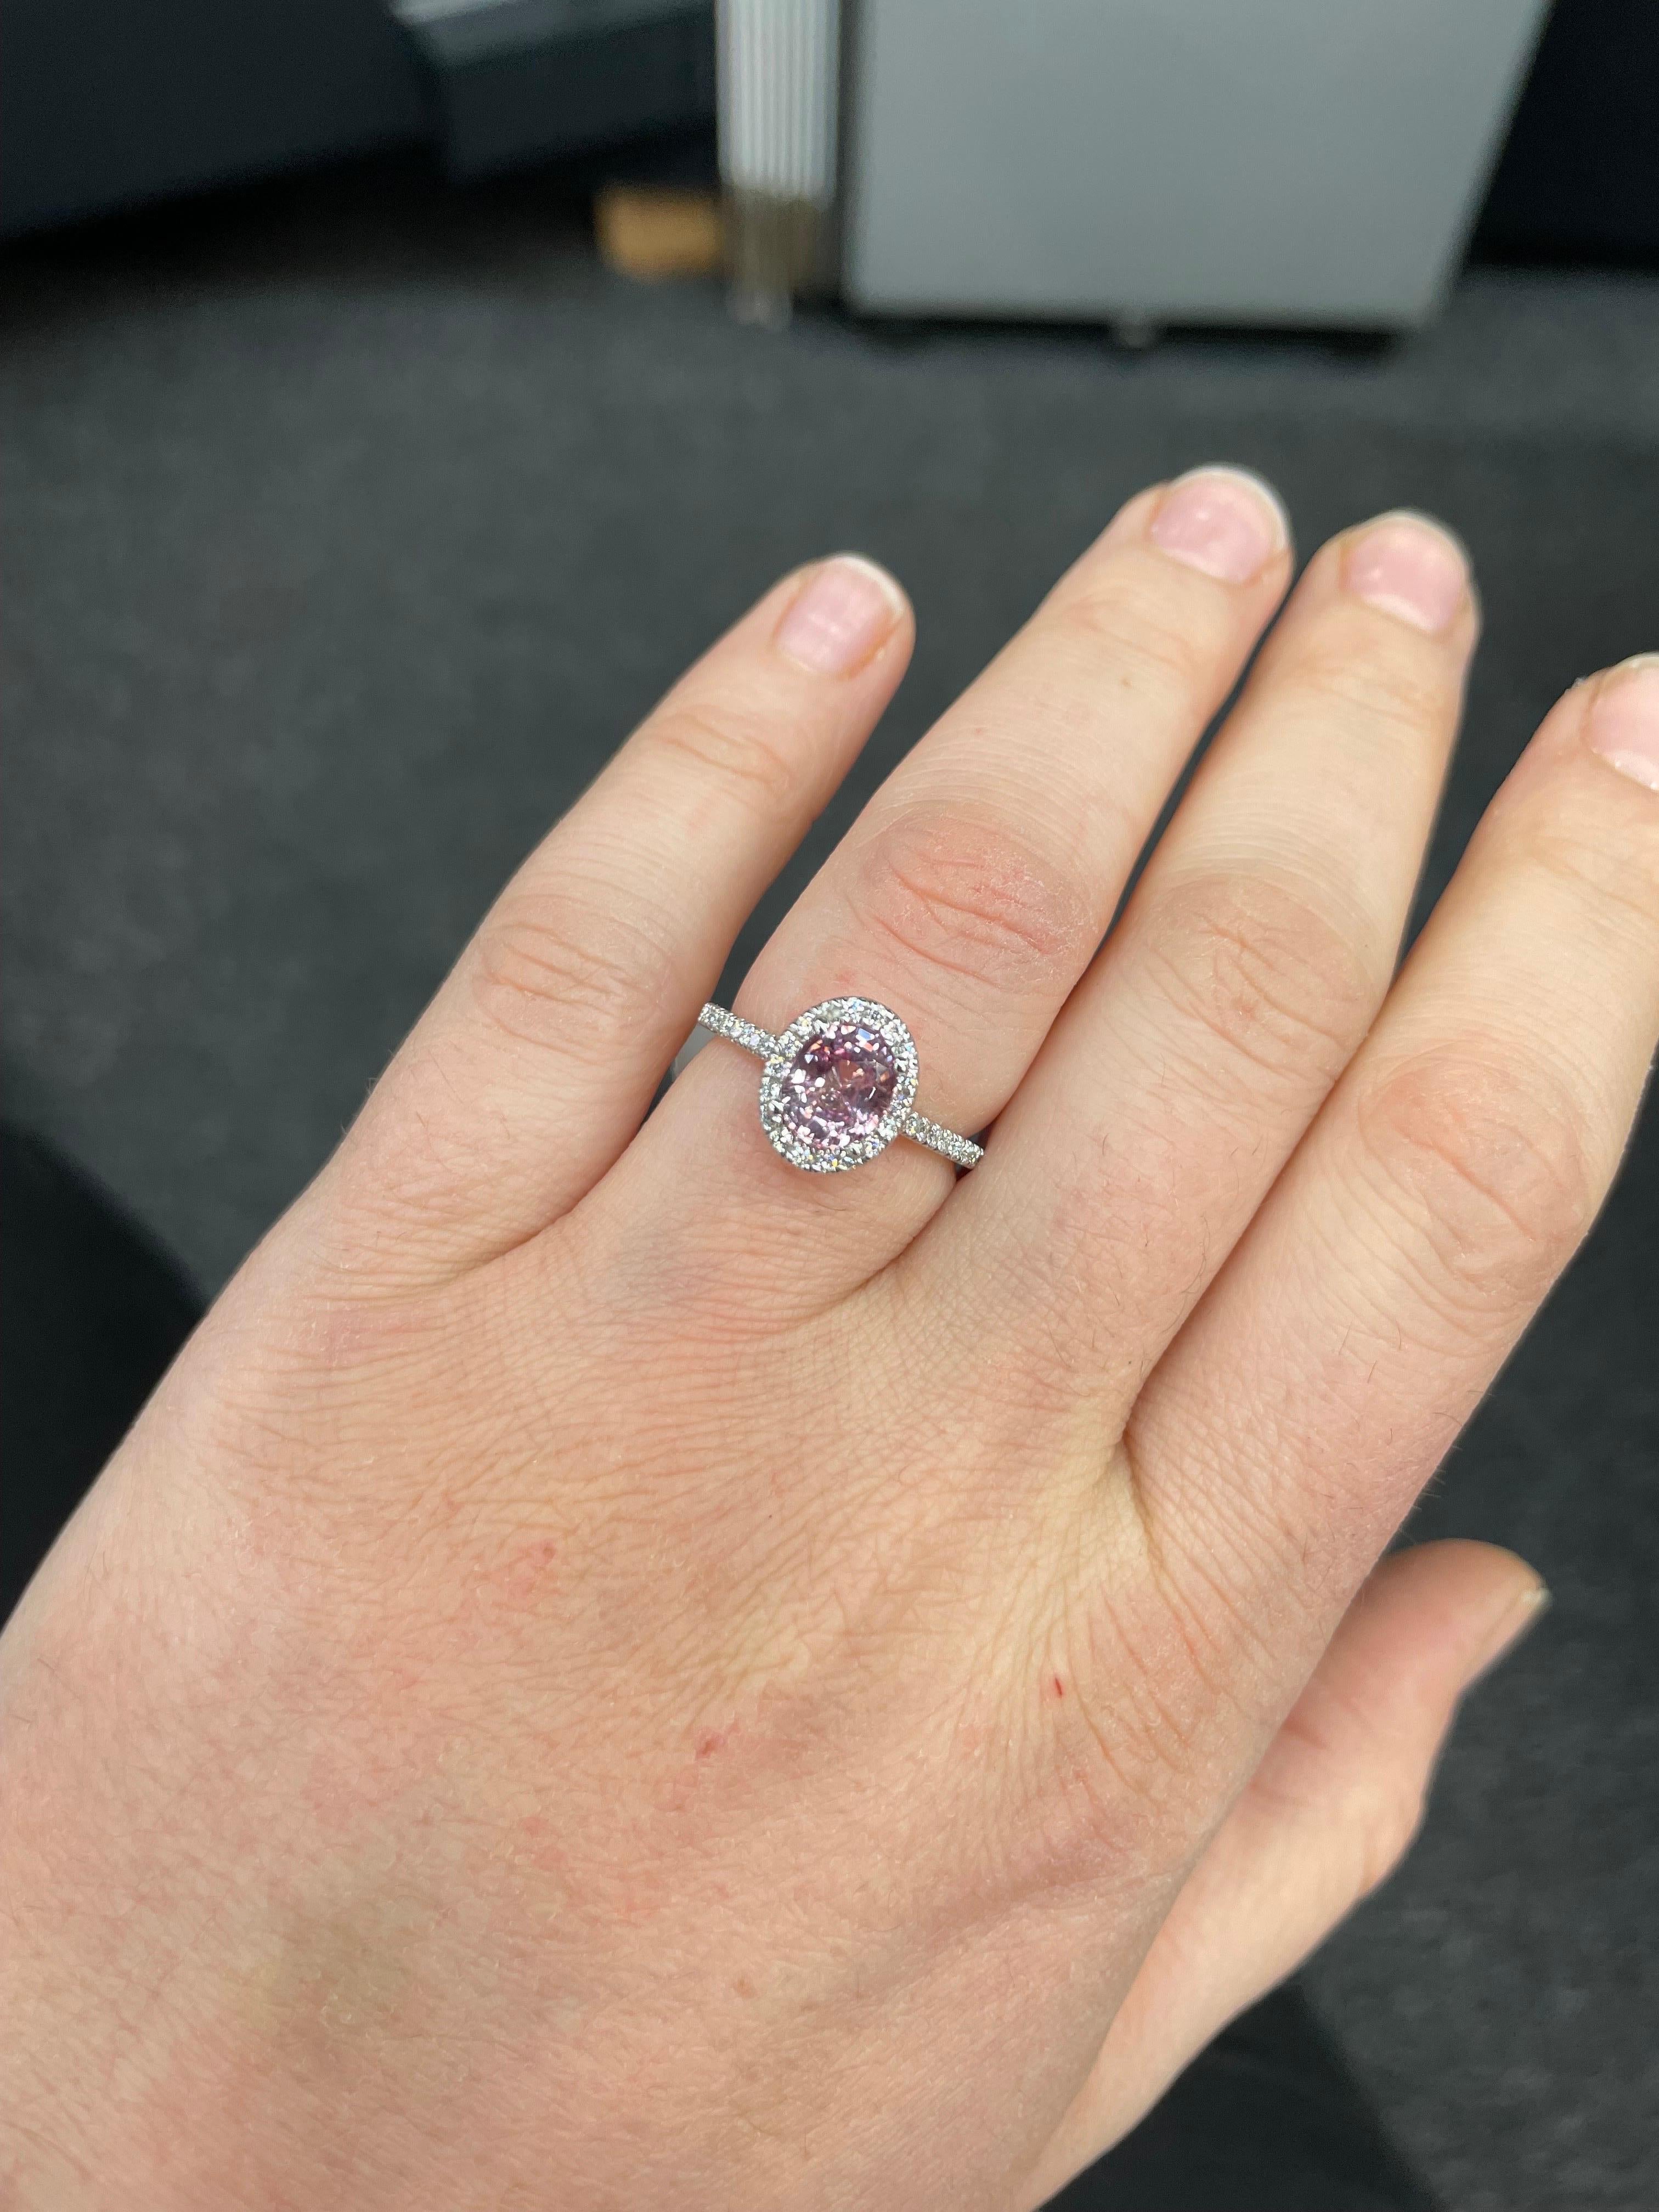 Oval Cut Certified Pink Sapphire No Heat Diamond Halo Ring 2.34 Carats 18k White Gold For Sale